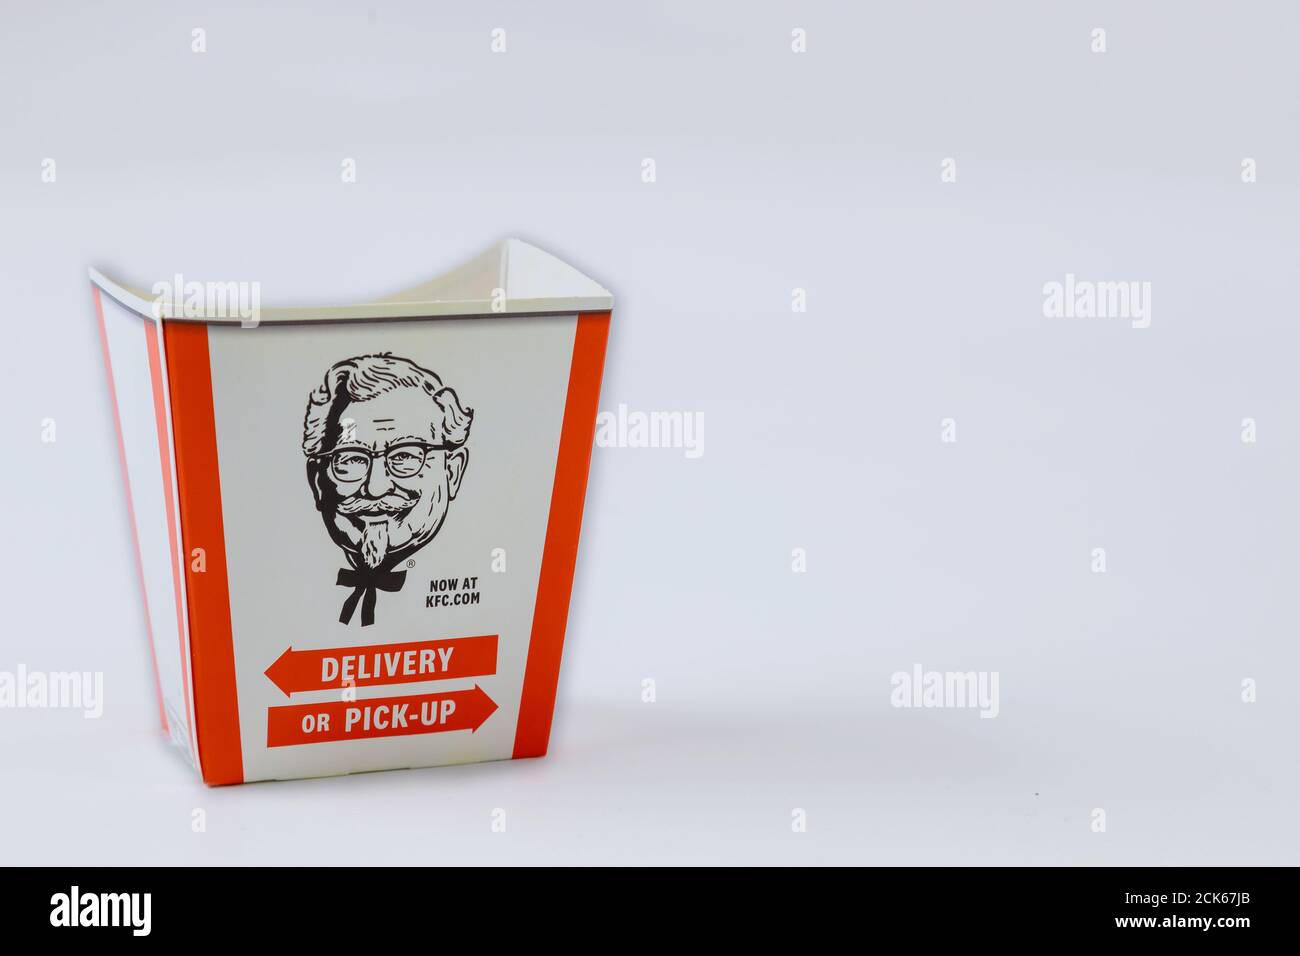 CLEVELAND OH US 15 SEPTEMBER 2020: Box with KFC logo on table in KFC Restaurant Stock Photo